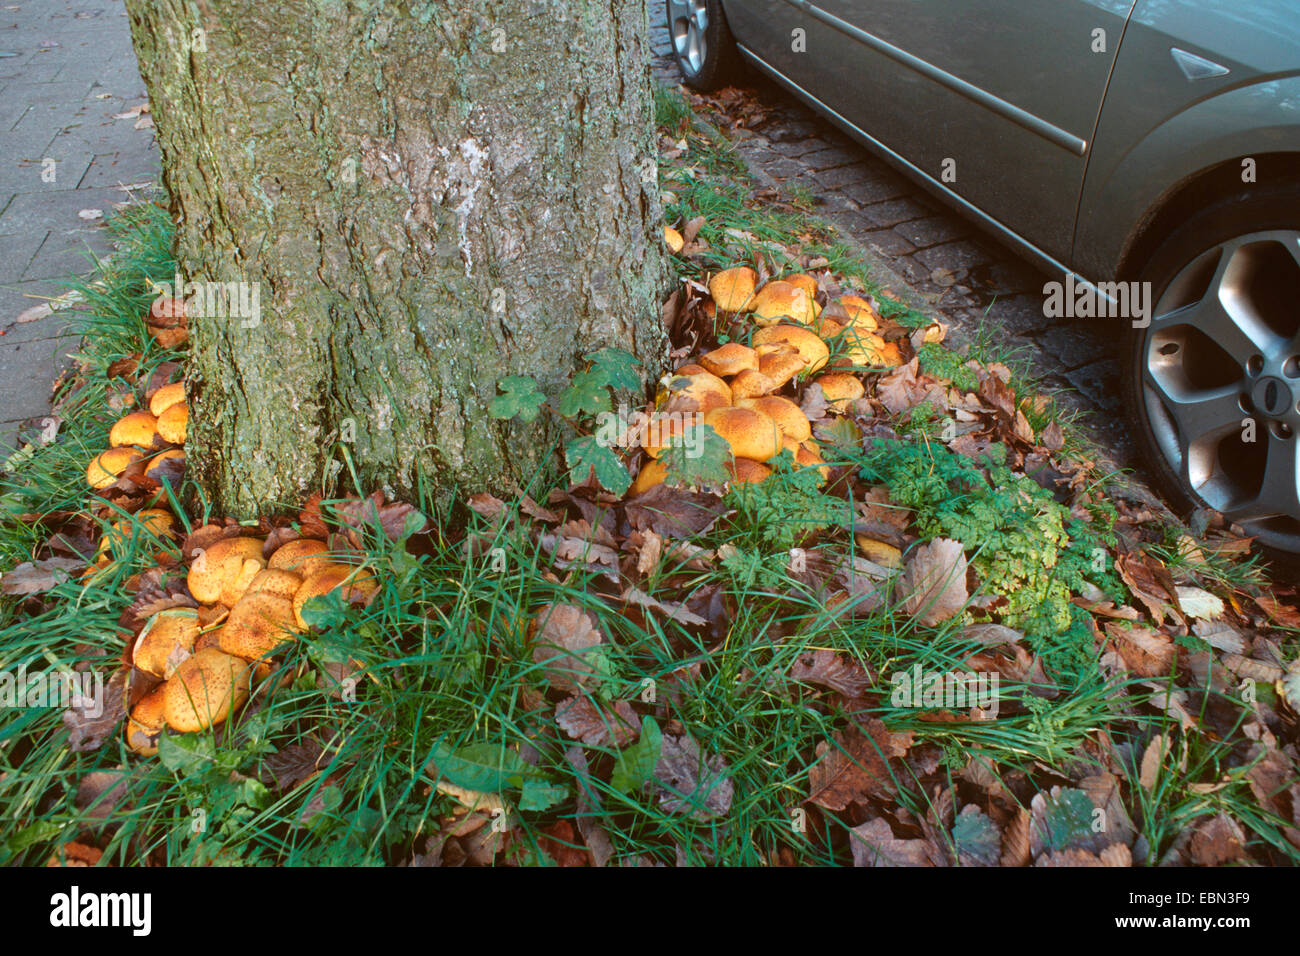 shaggy scalycap (Pholiota squarrosa), at growing on a tree grate, Germany Stock Photo